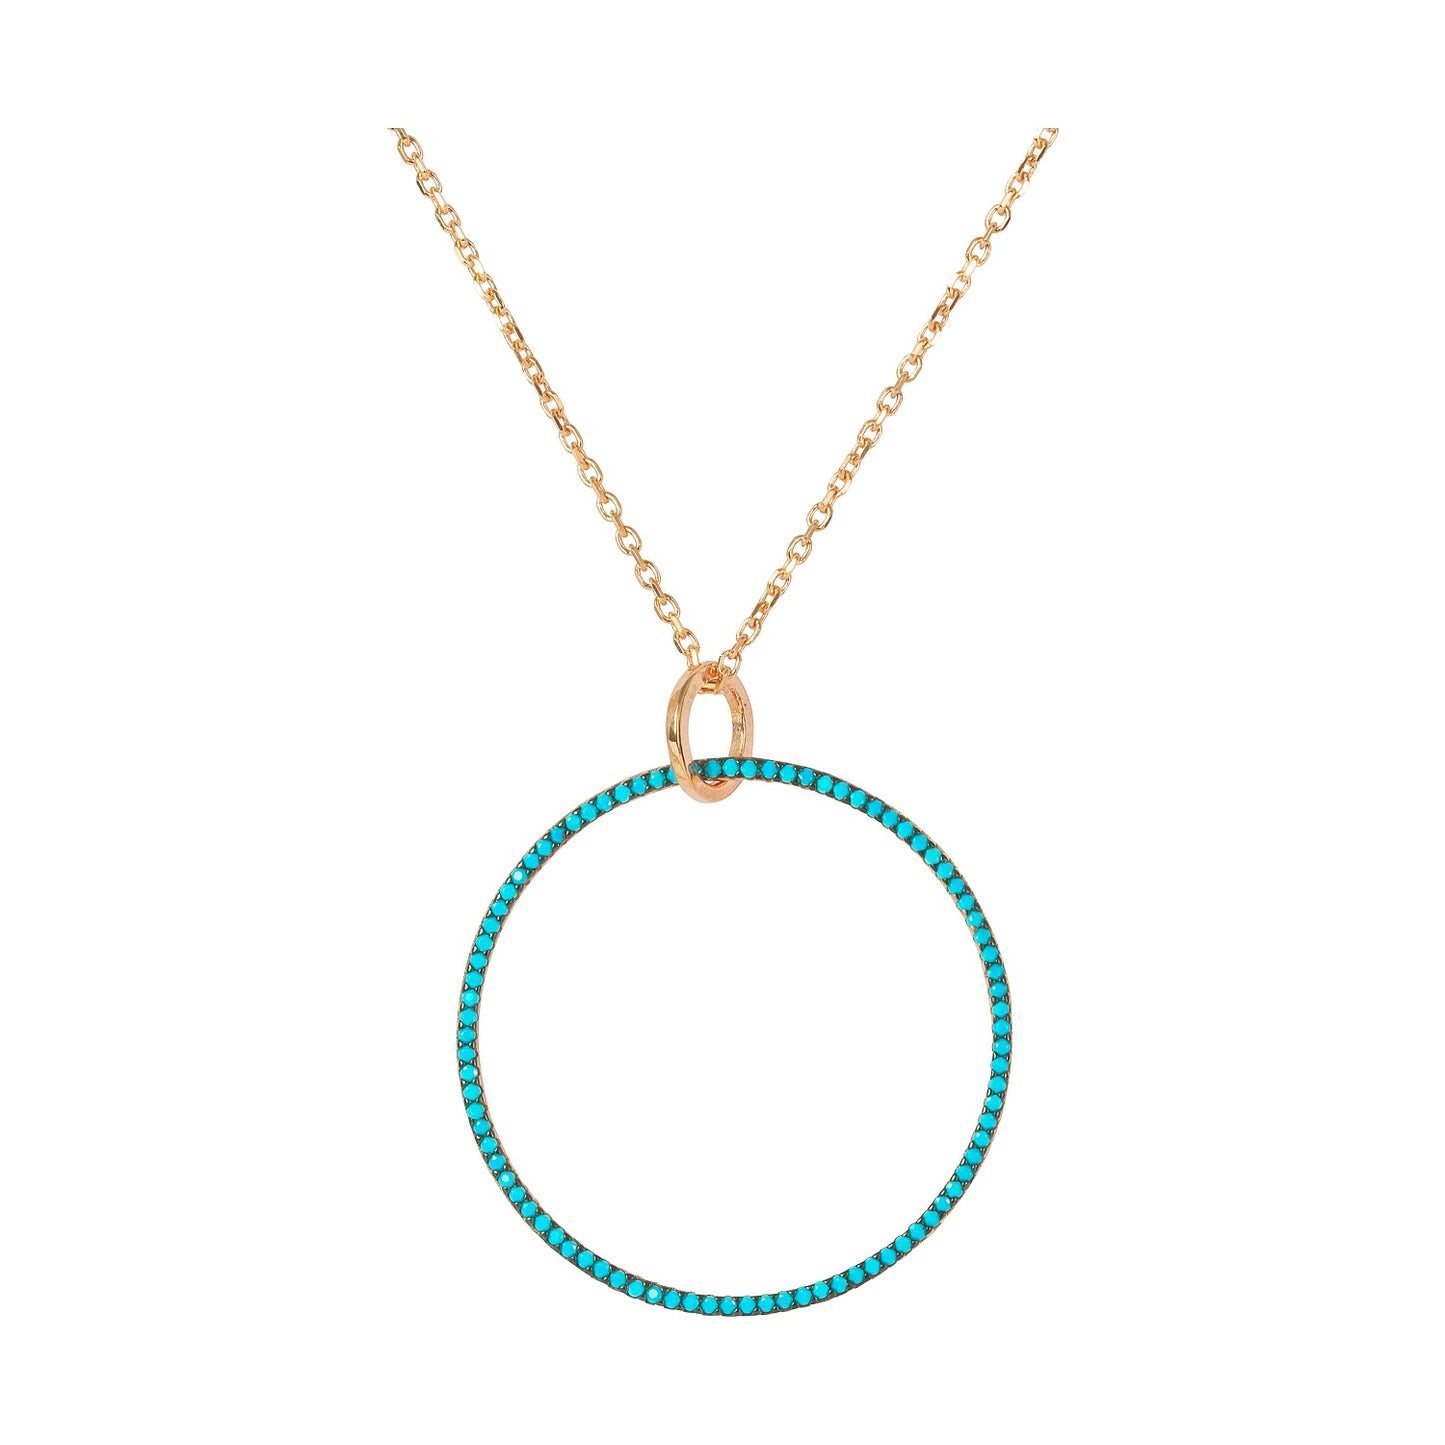 60cm Long Necklace With Large Turquoise Circle ( circle diam 31mm ) - 'Ibiza Vibes' Collection